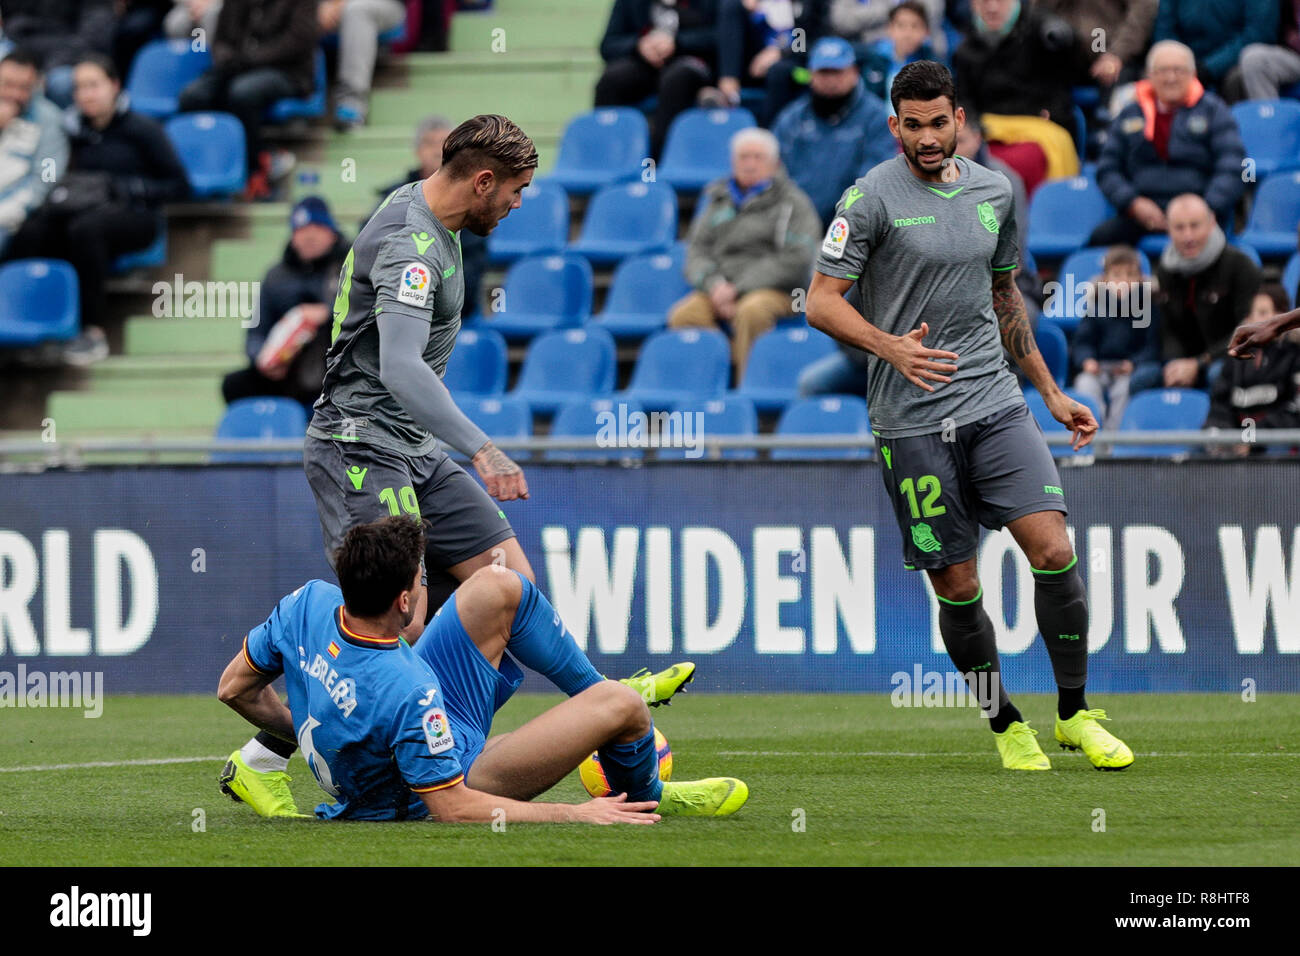 Getafe CF's Leandro Cabrera and Real Sociedad's Theo Hernandez are seen in action during the La Liga football match between Getafe CF and Real Sociedad at the Coliseum Alfonso Perez in Getafe, Spain. ( Final score; Getafe CF 1:0 Real Sociedad ) Stock Photo